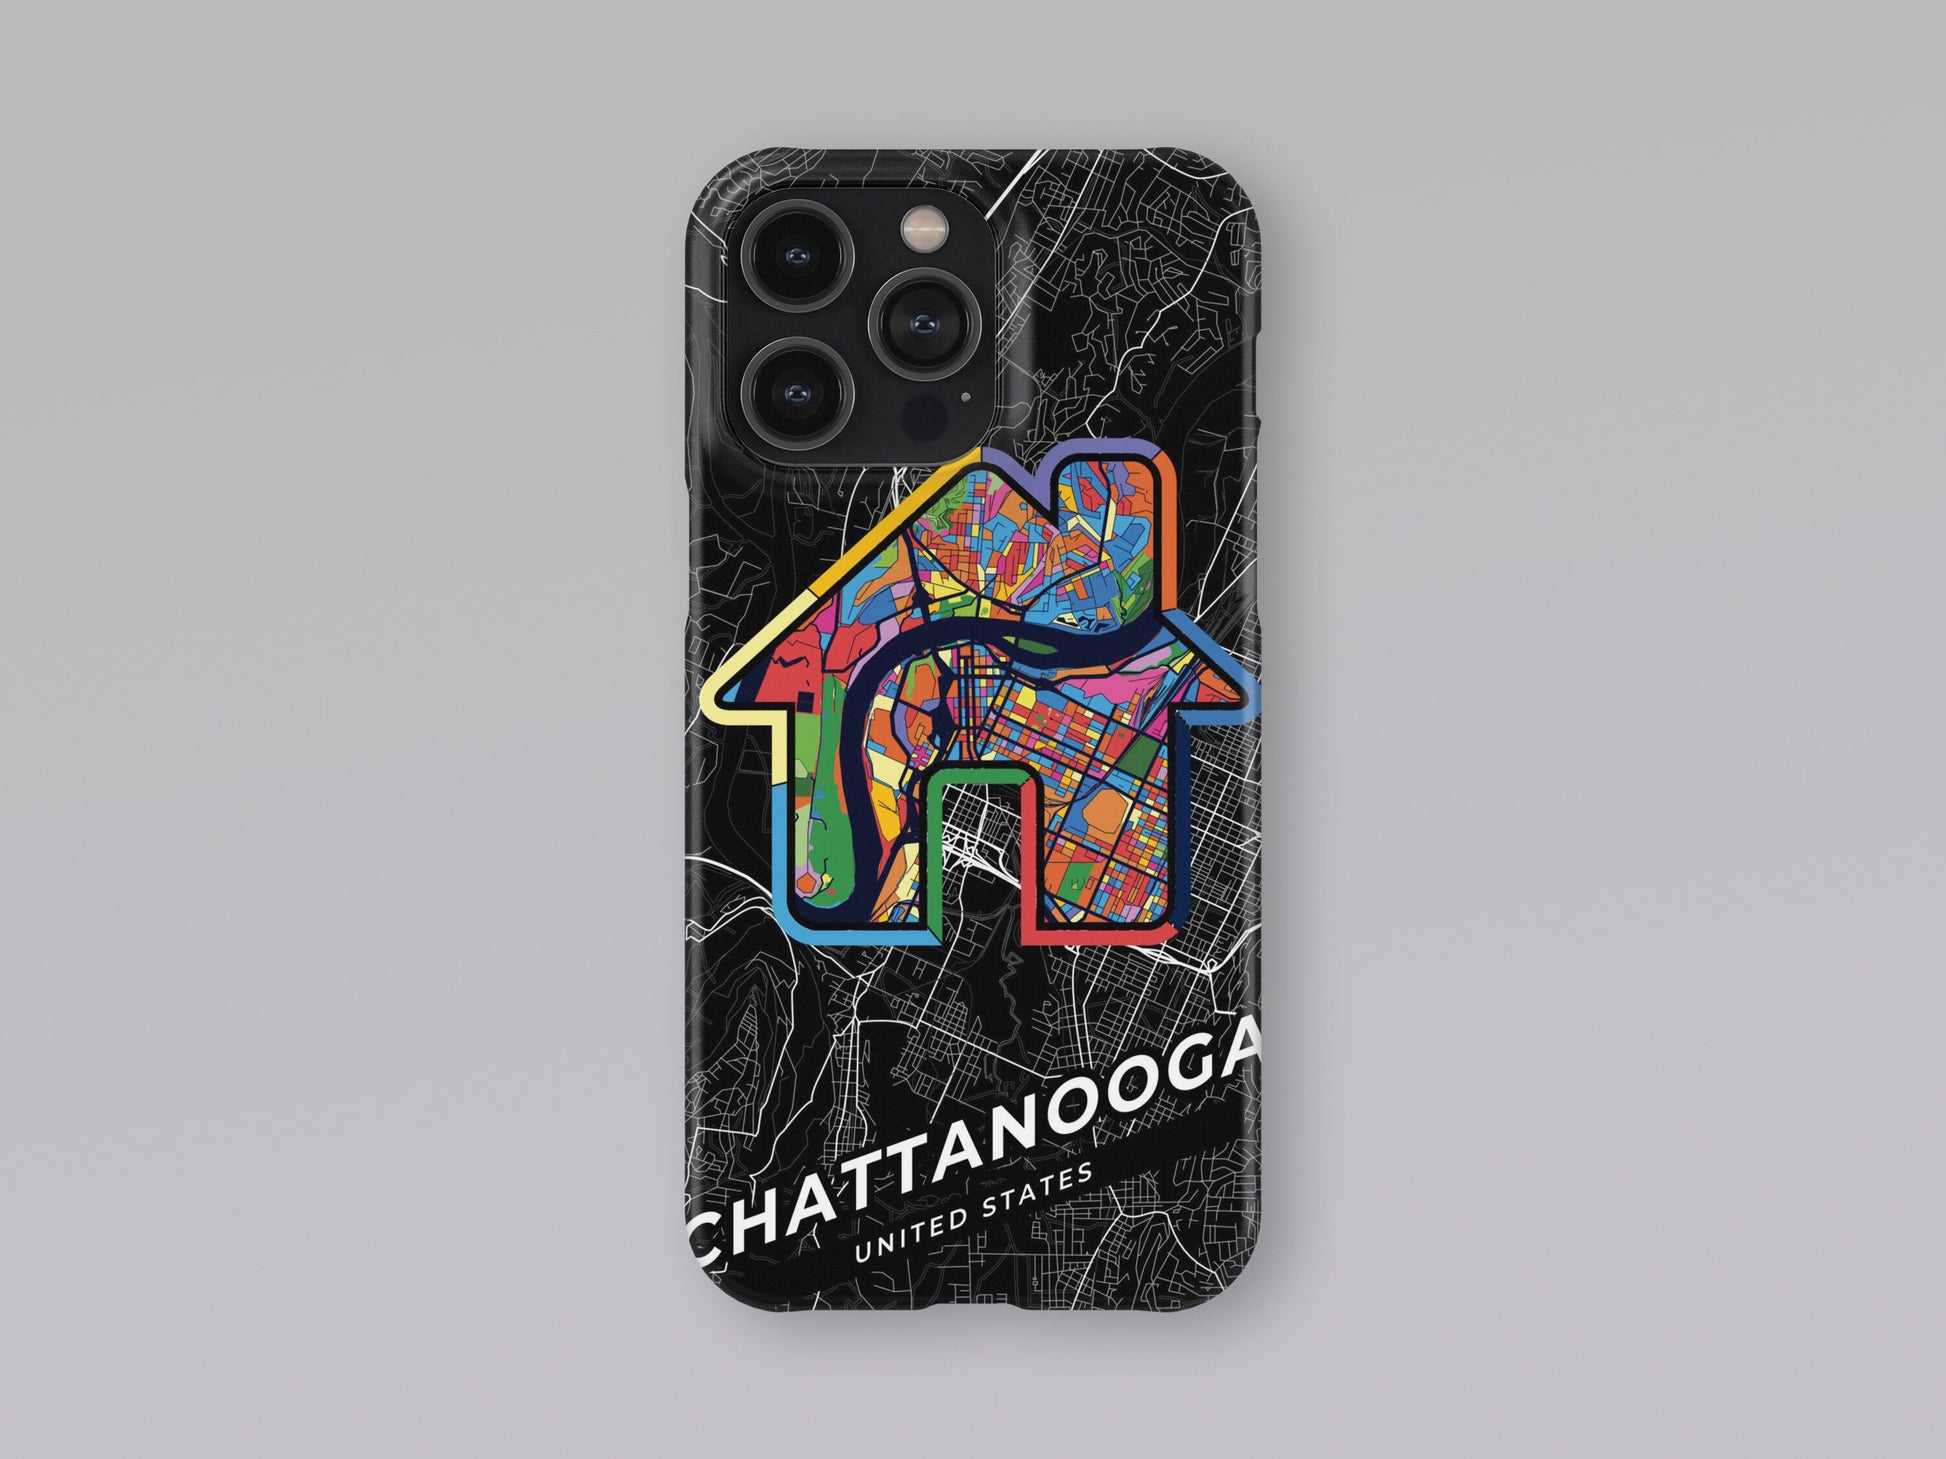 Chattanooga Tennessee slim phone case with colorful icon. Birthday, wedding or housewarming gift. Couple match cases. 3